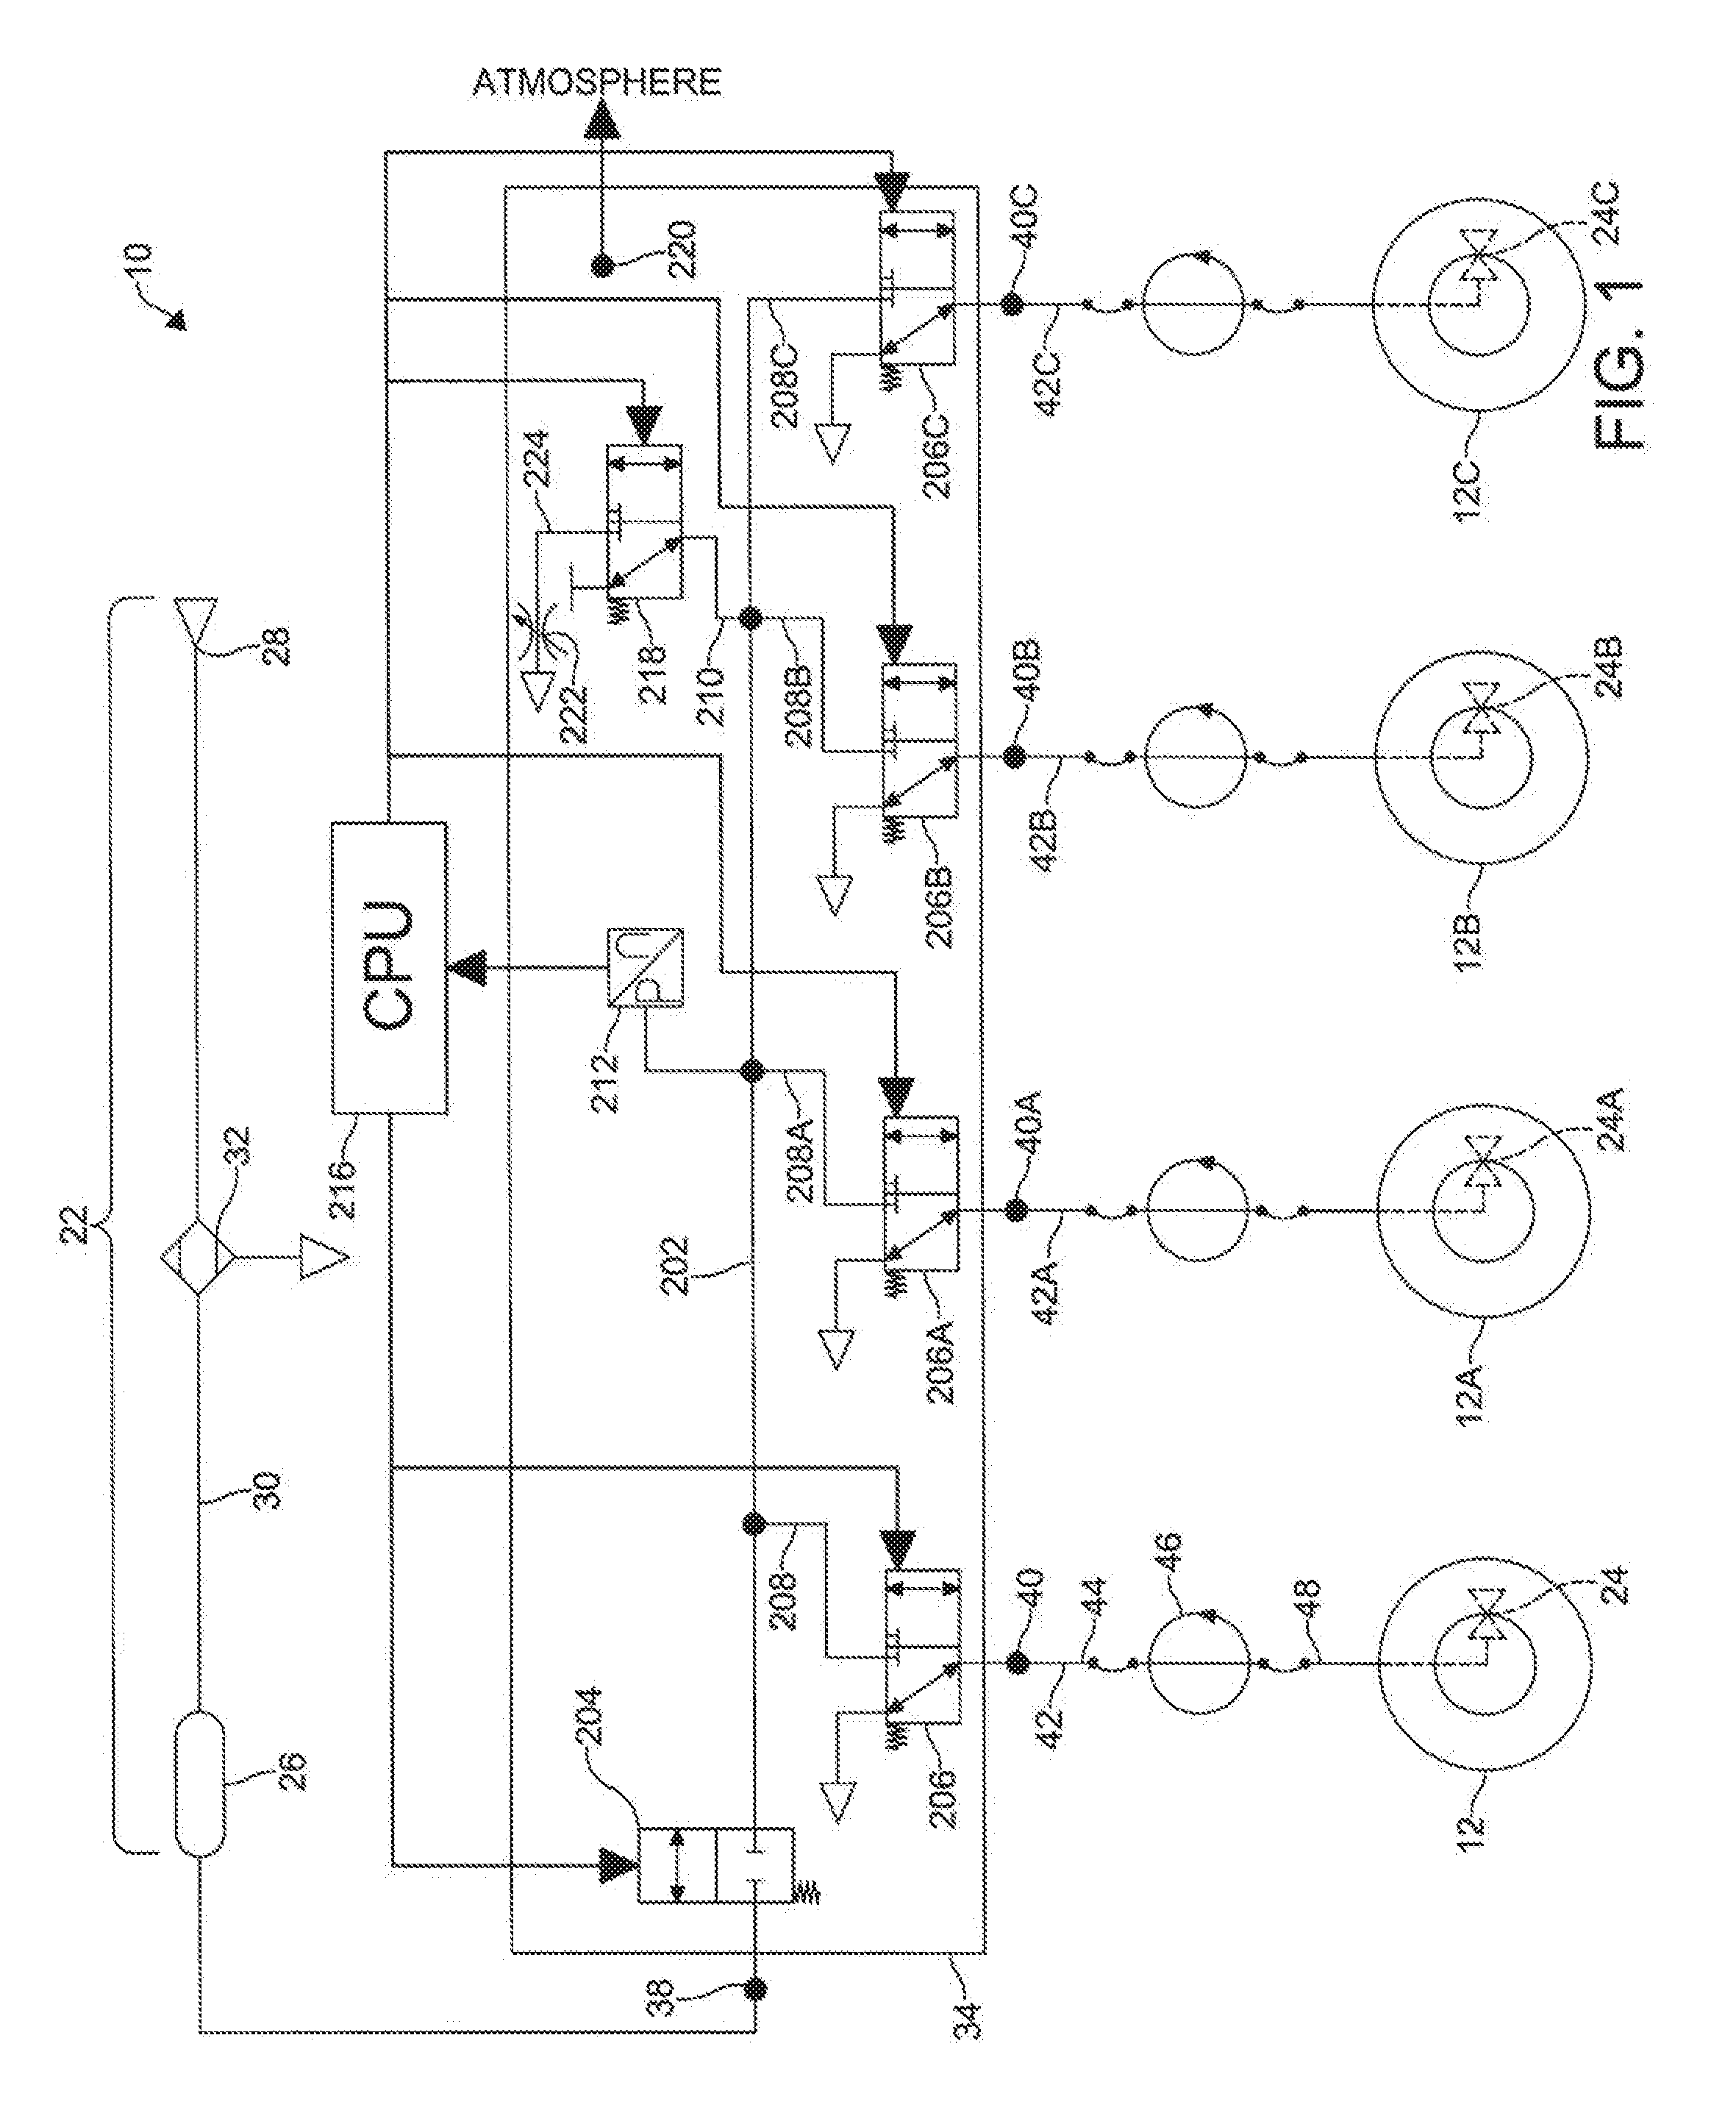 System and method for decreasing tire pressure